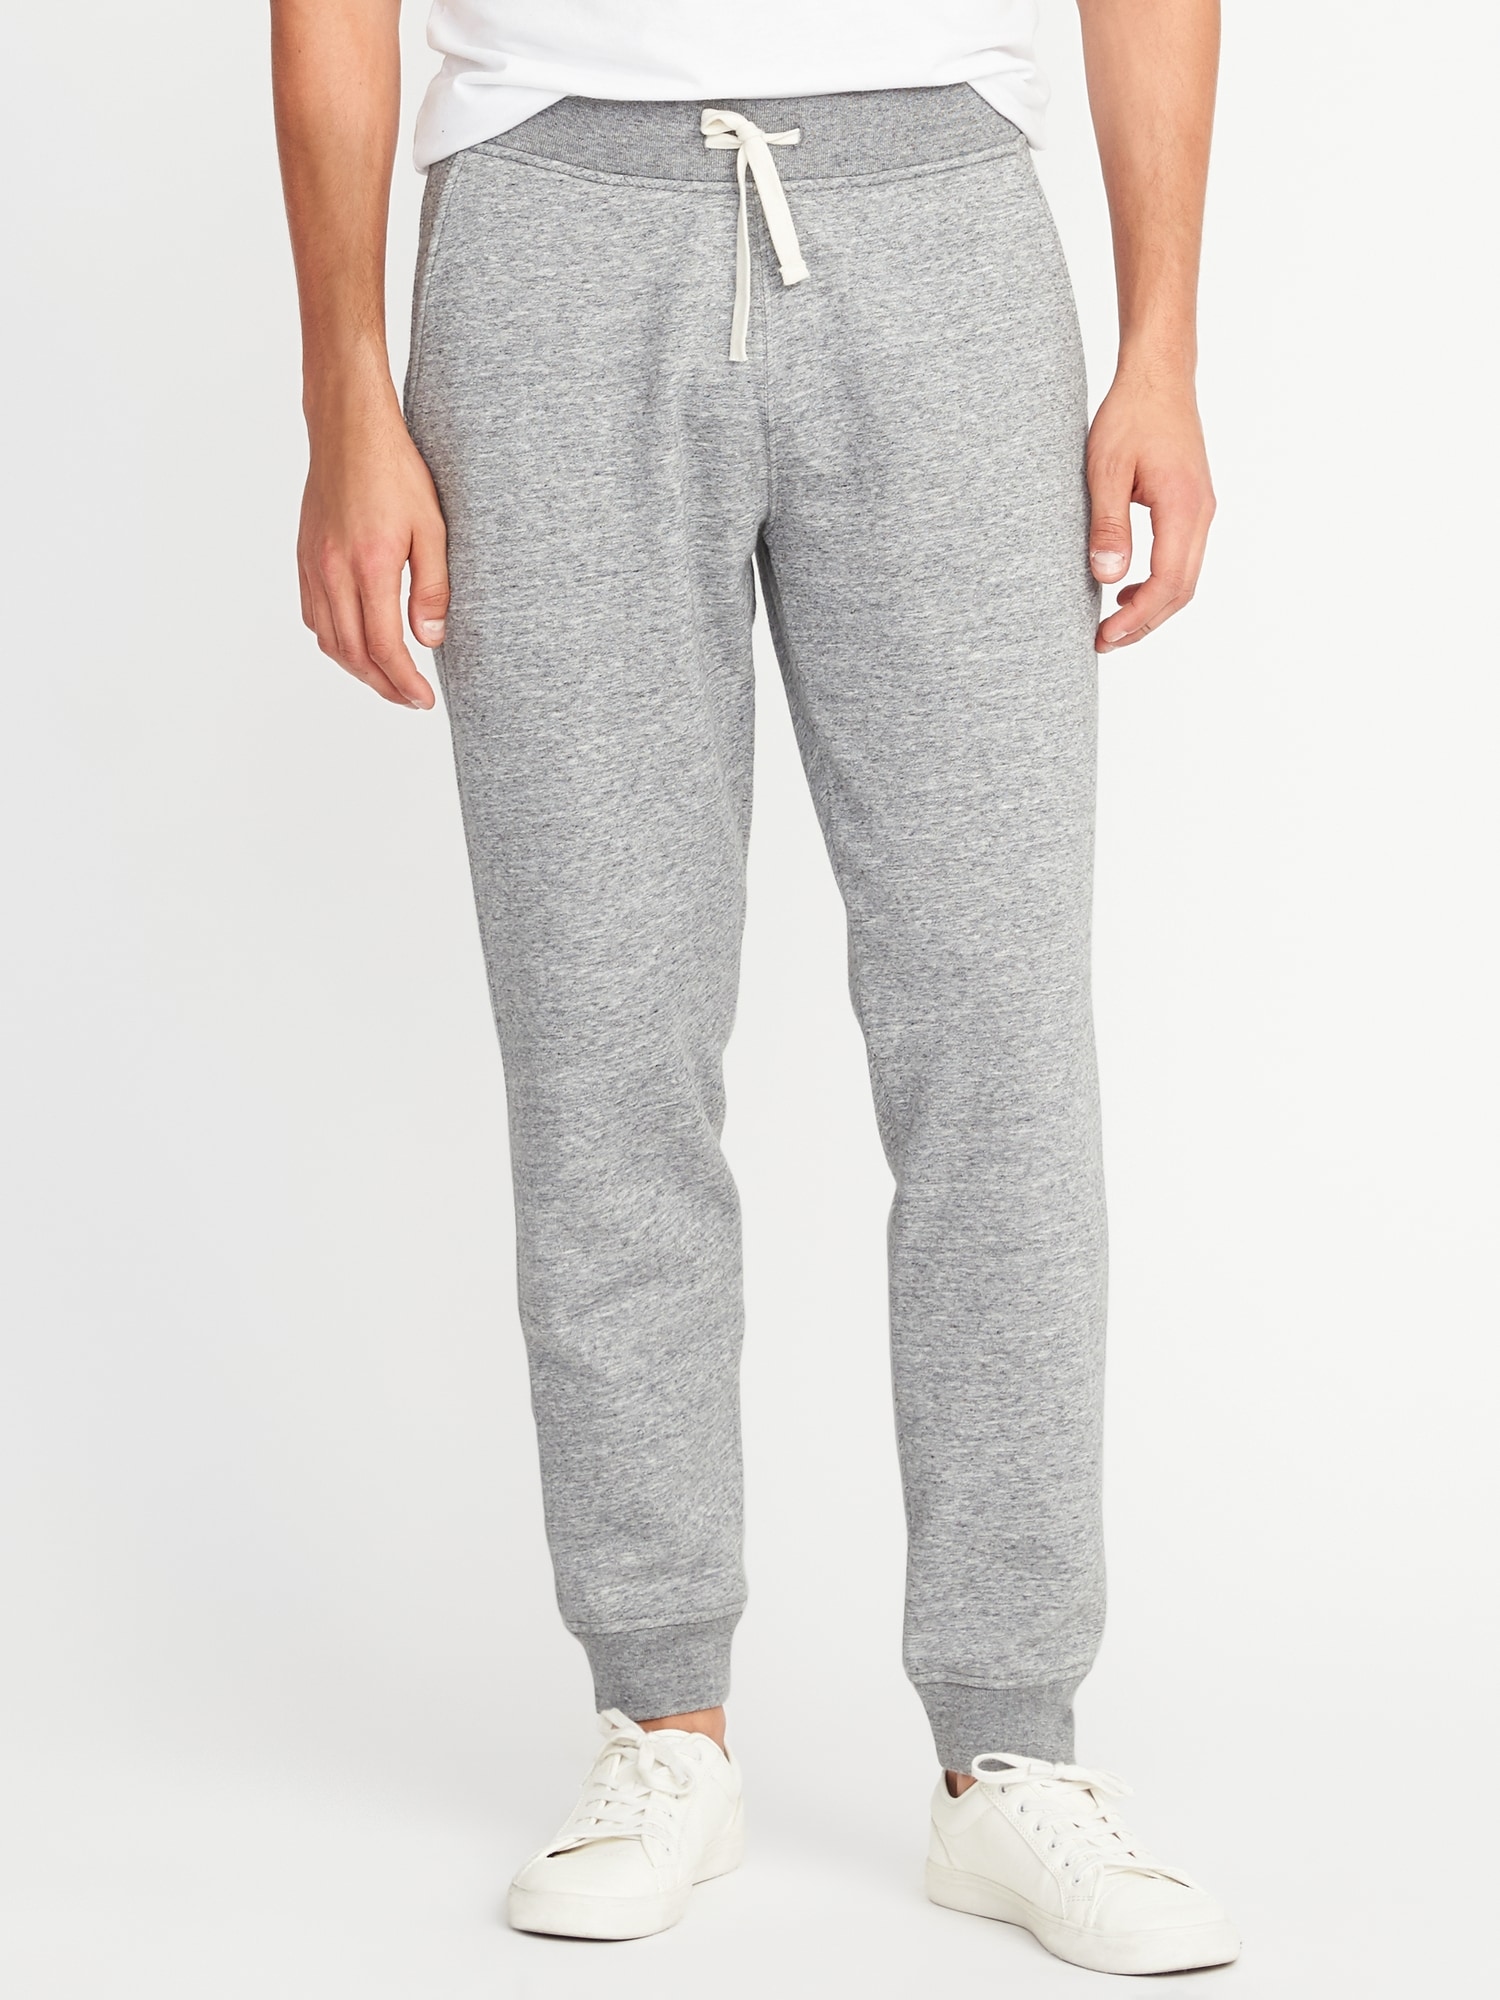 Old Navy Men's Tapered Street Jogger Sweatpants